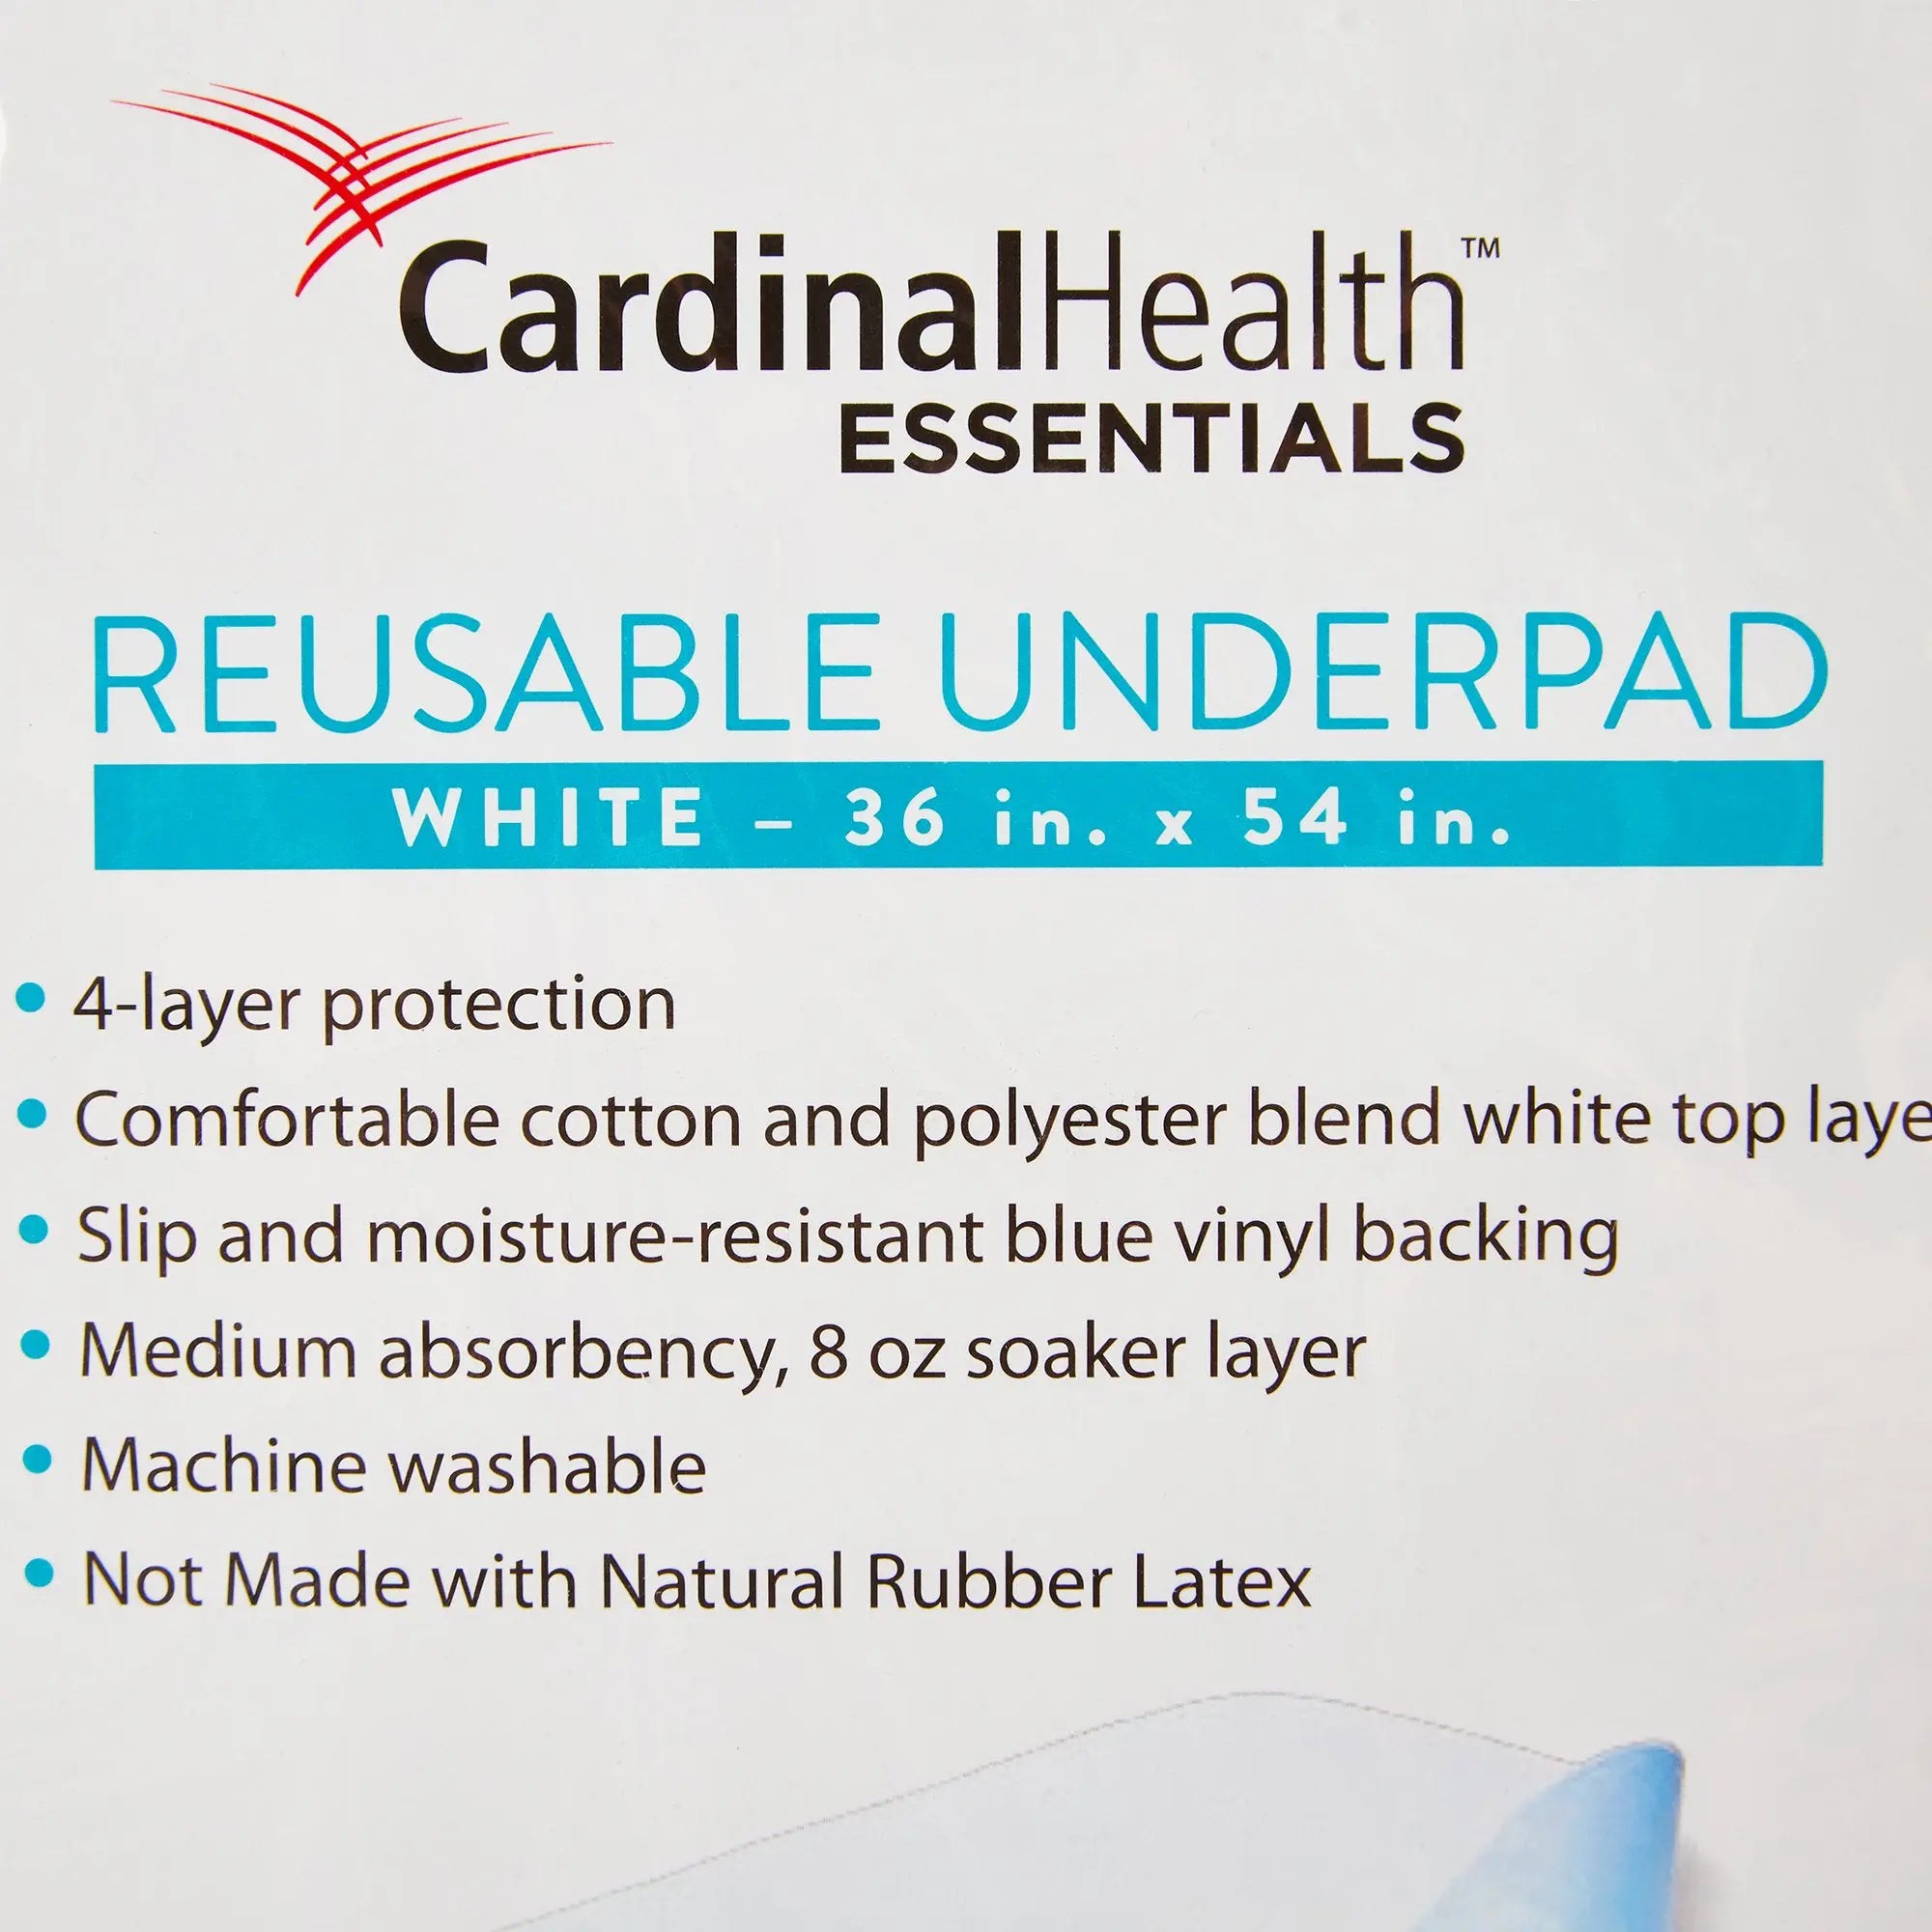 Cardinal Health Reusable Underpads For Sale - Well Before